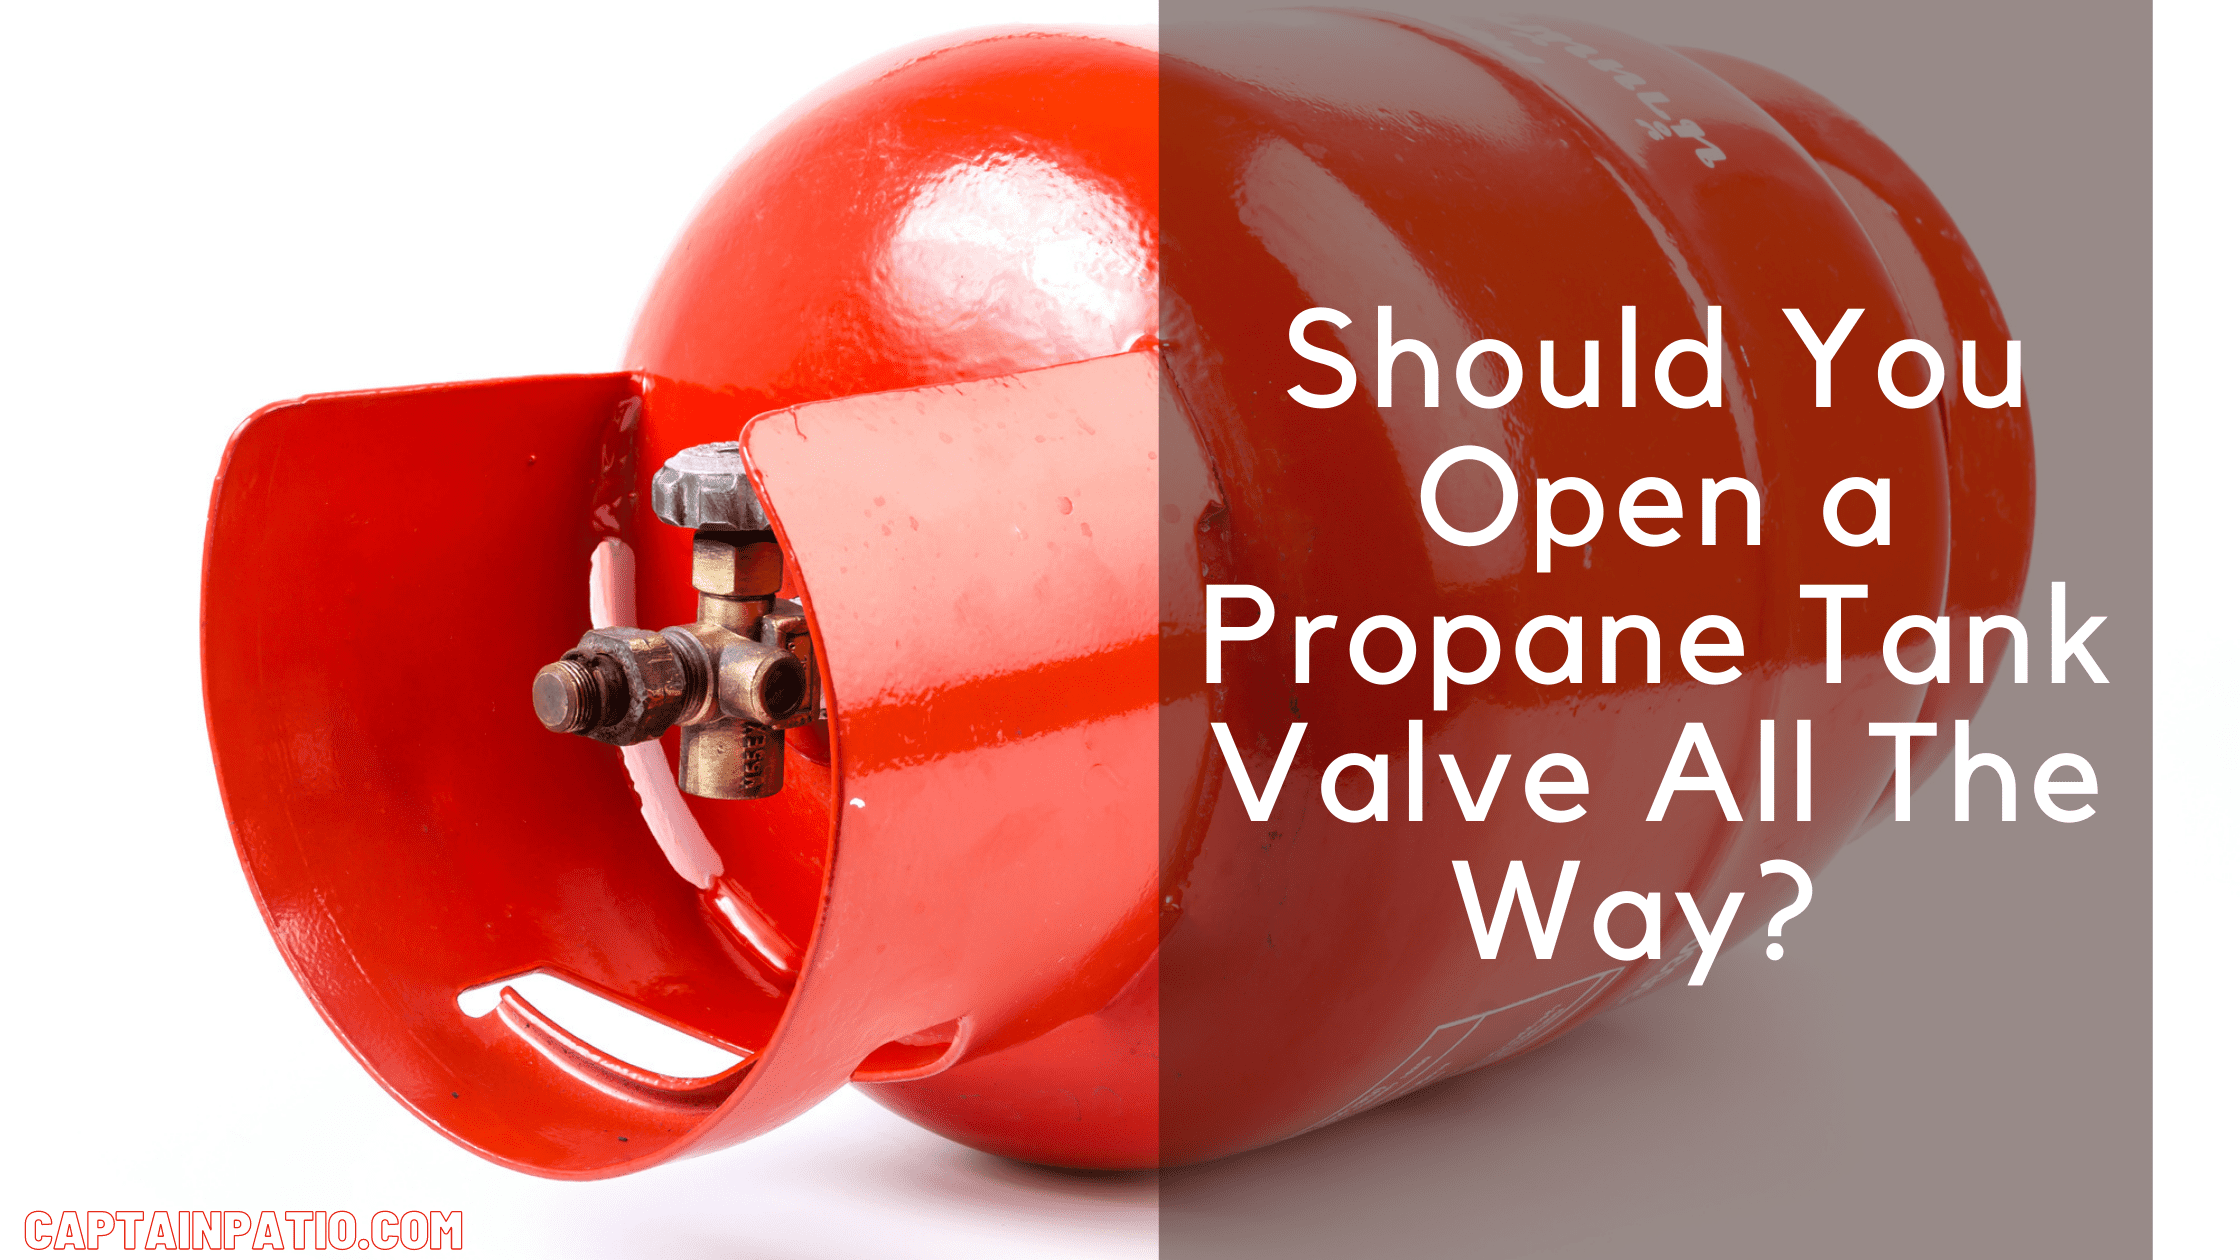 Should You Open a Propane Tank Valve All The Way?